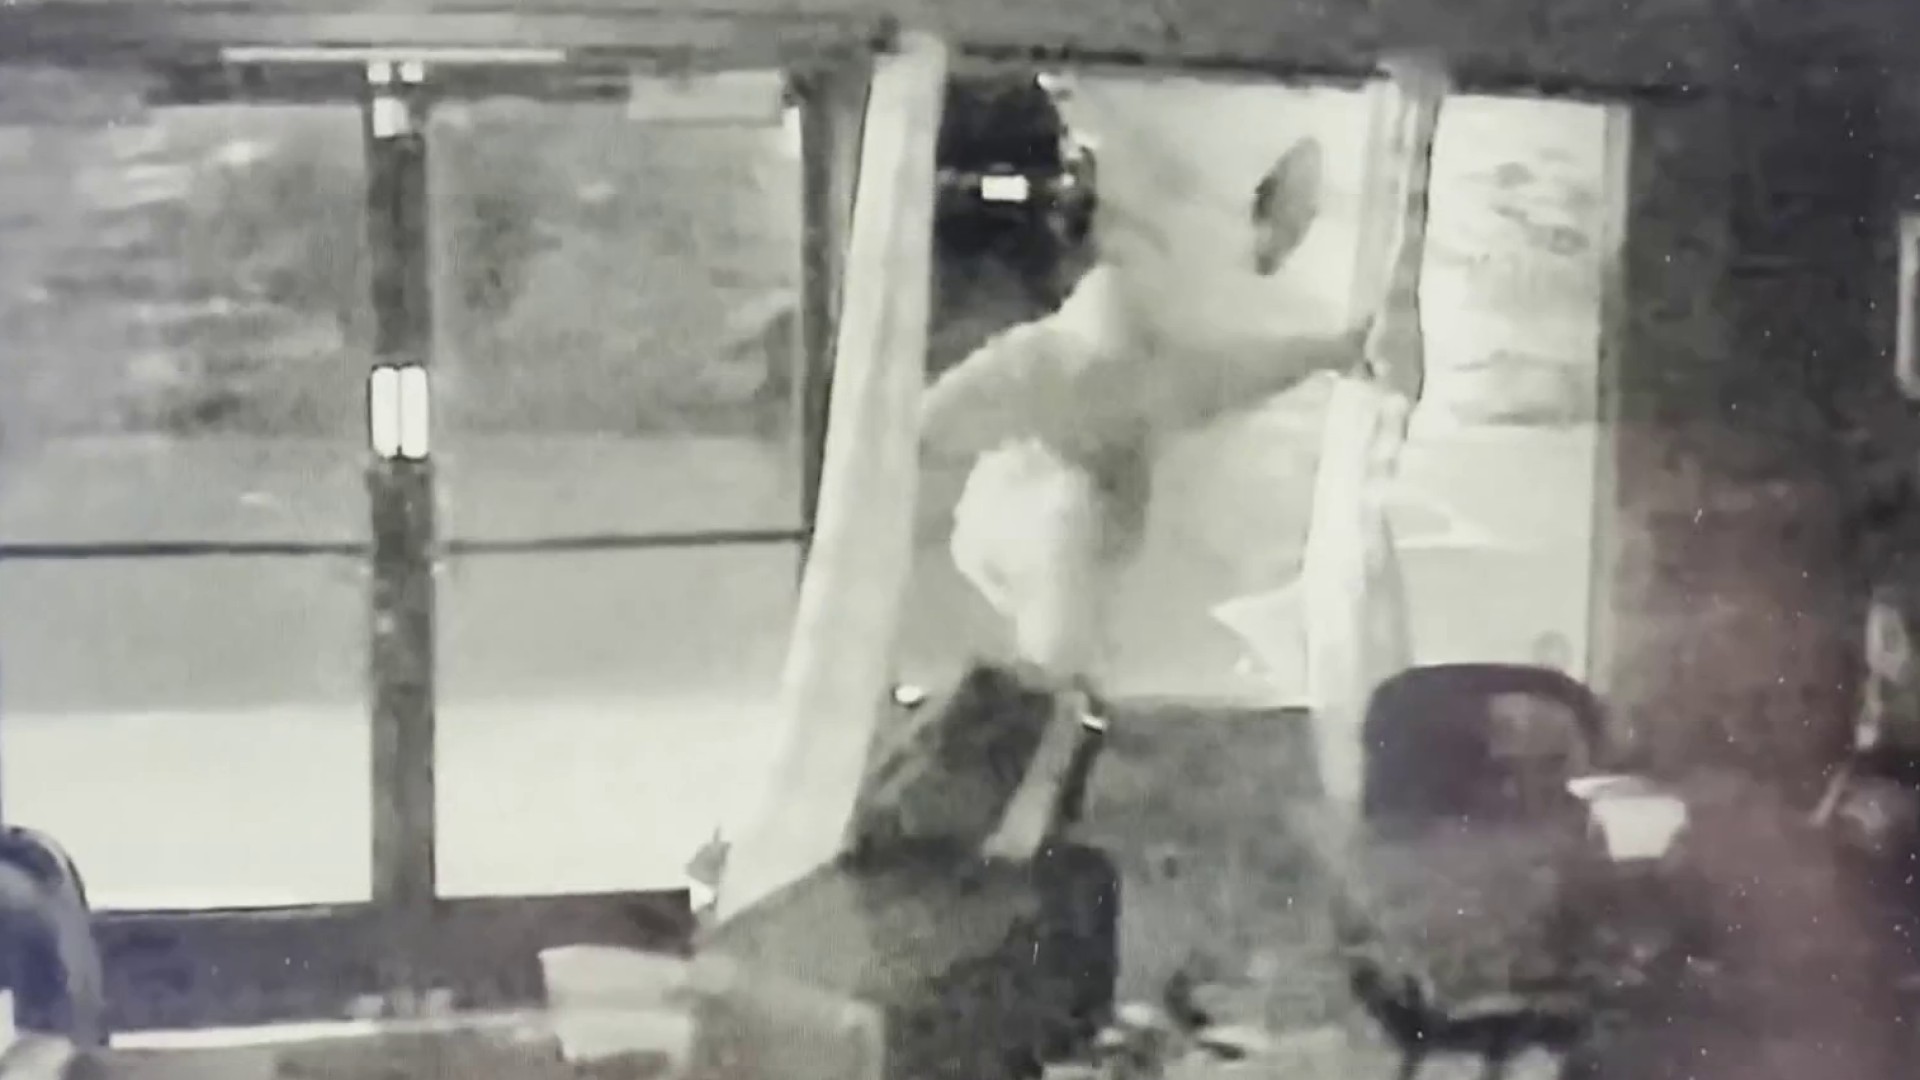 Thieves Use Pickup Truck to Drag Away ATM in California Heist Caught on Video